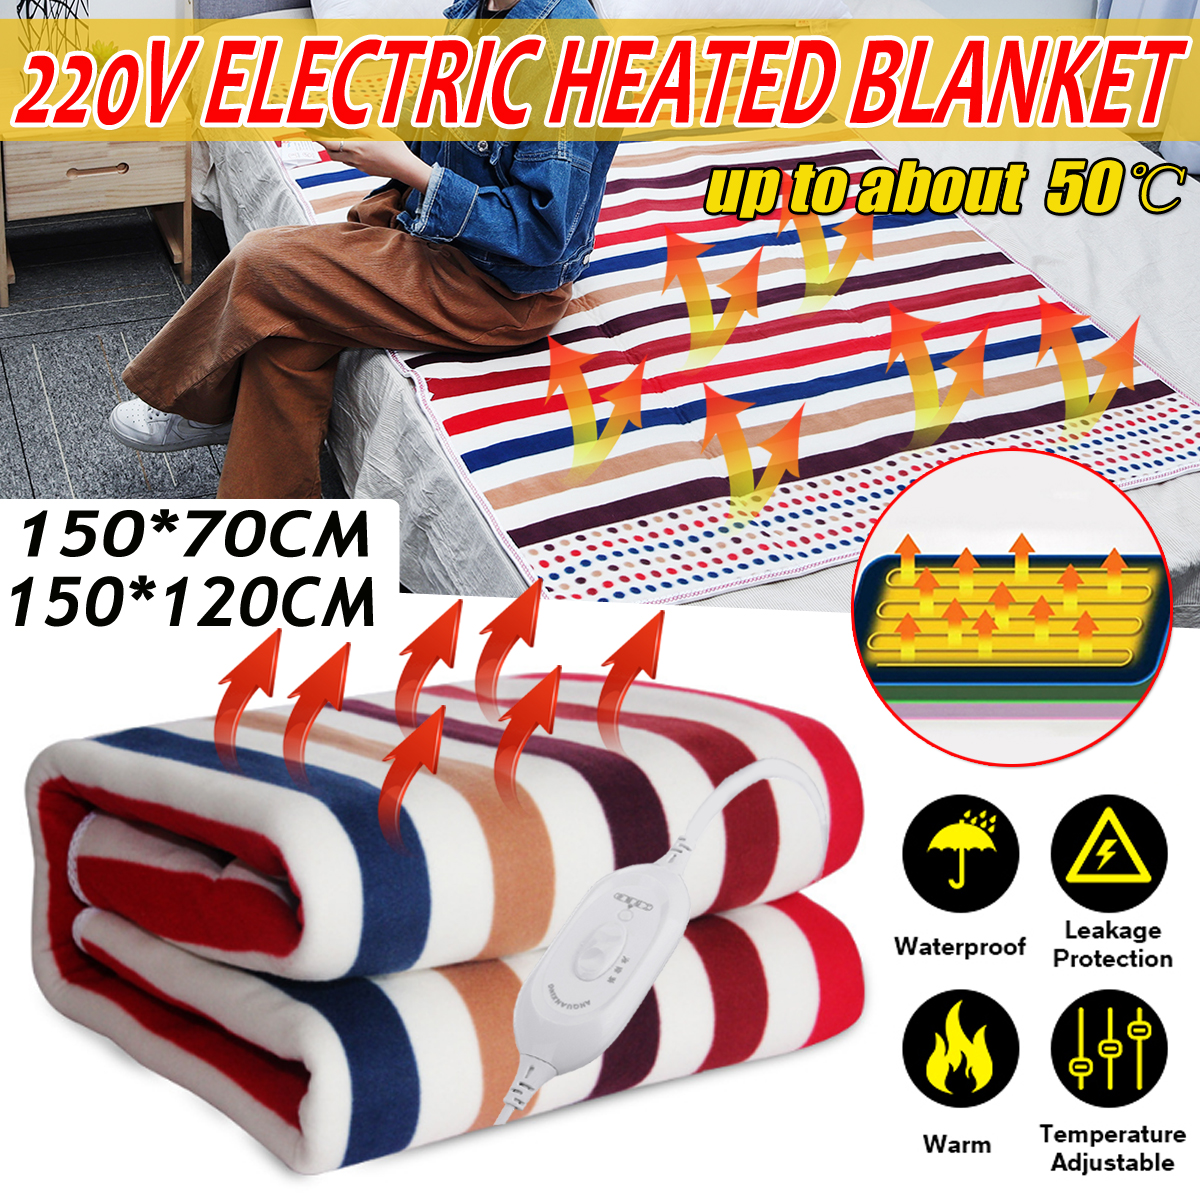 150x120cm70cm-Winter-Electric-Heated-Blanket-Winter-Warmer-Heater-with-Adjustable-Temperature-Contro-1612246-1